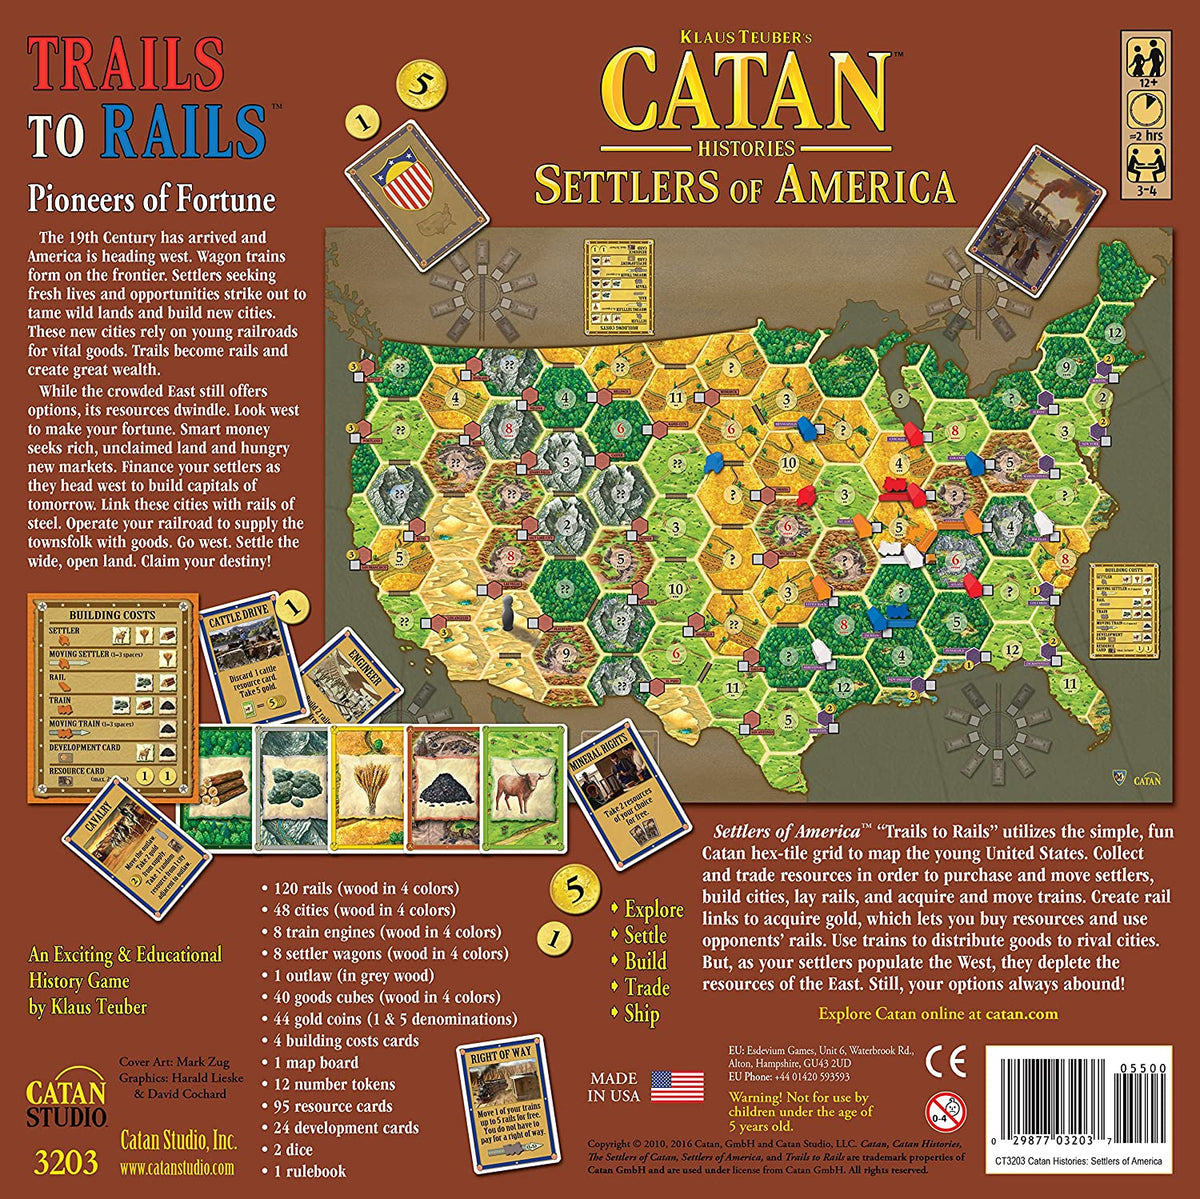 Catan Histories: Settlers of America Trails to Rails